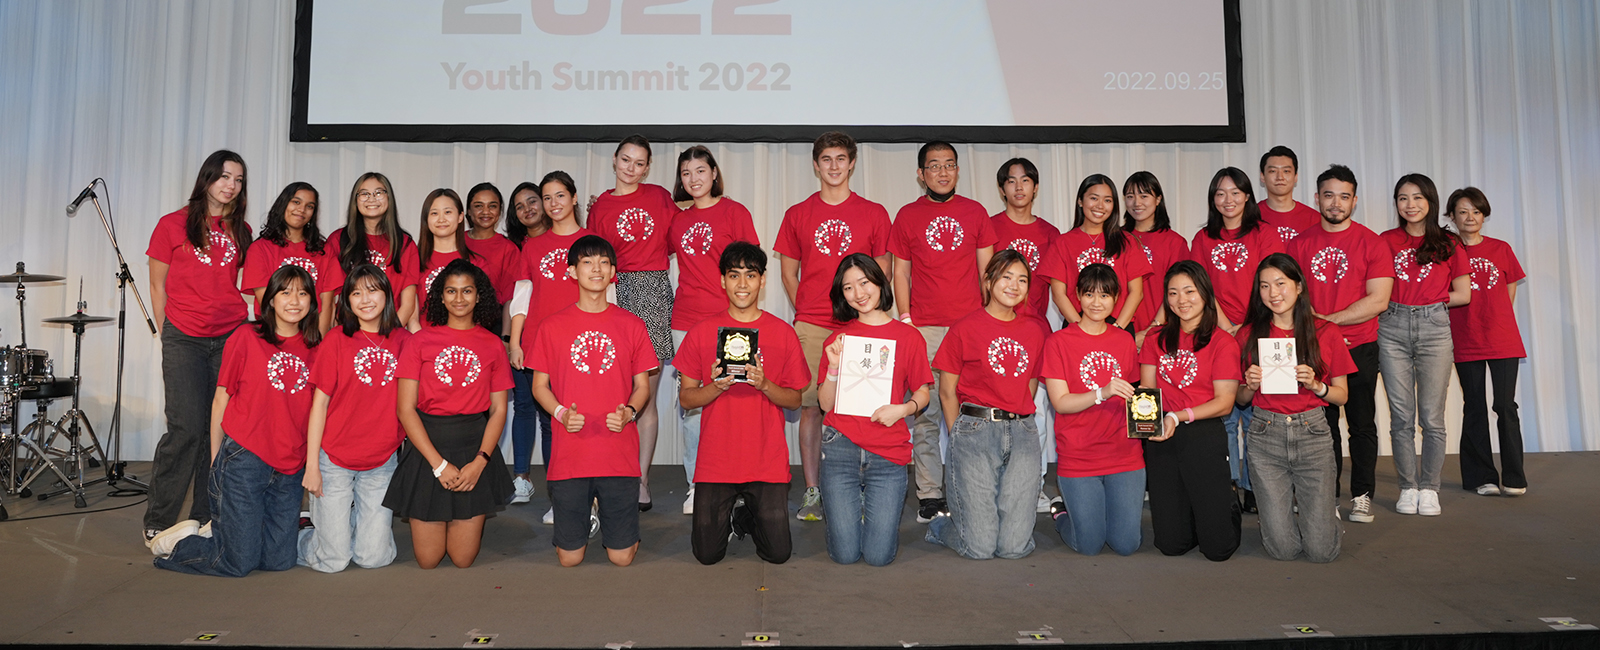 Youth Summit 2022 - Thank you